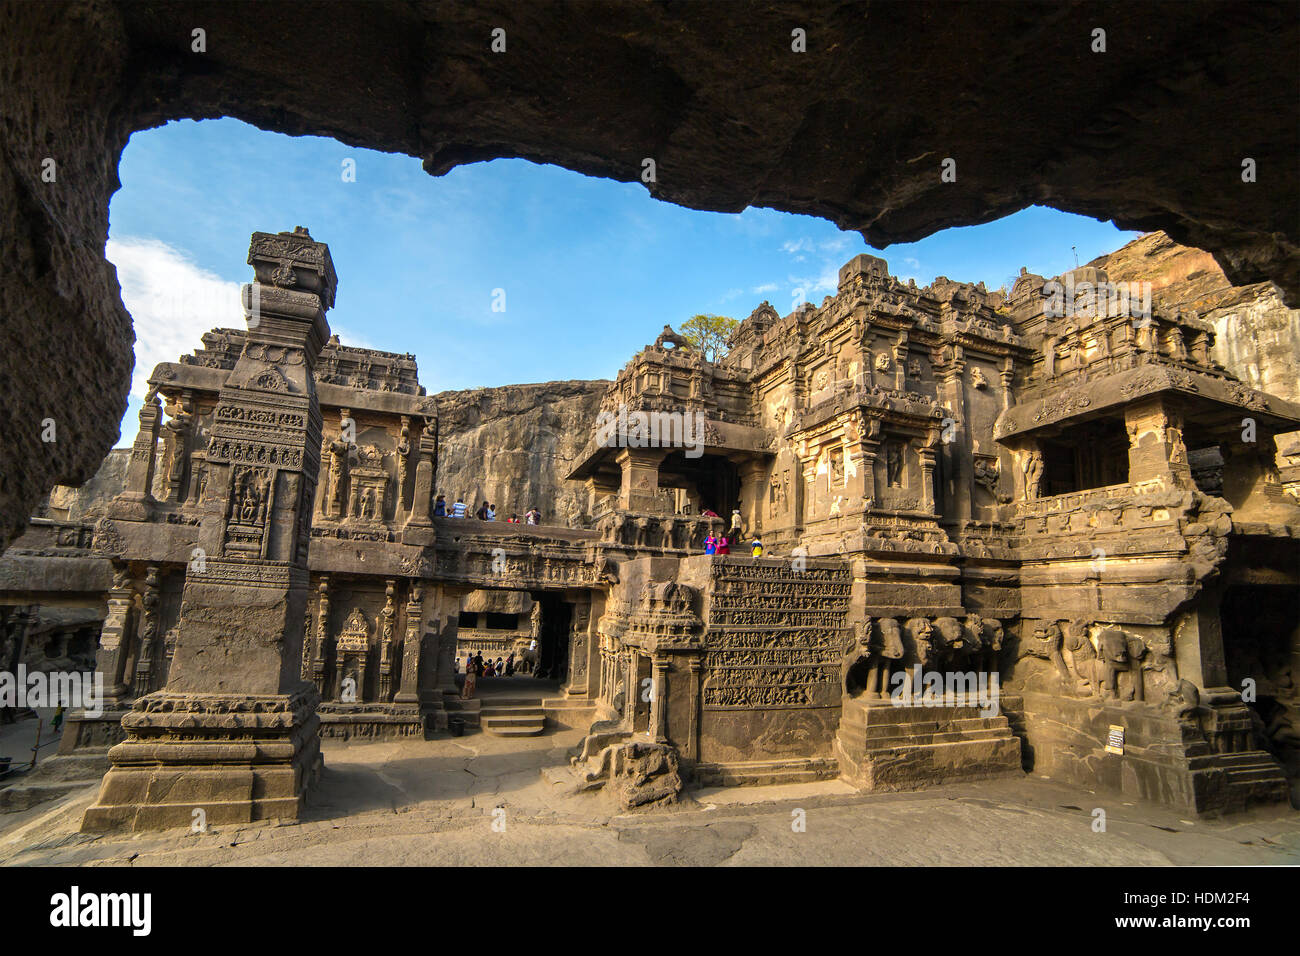 Kailas temple in Ellora caves complex, Maharashtra state in India Stock Photo